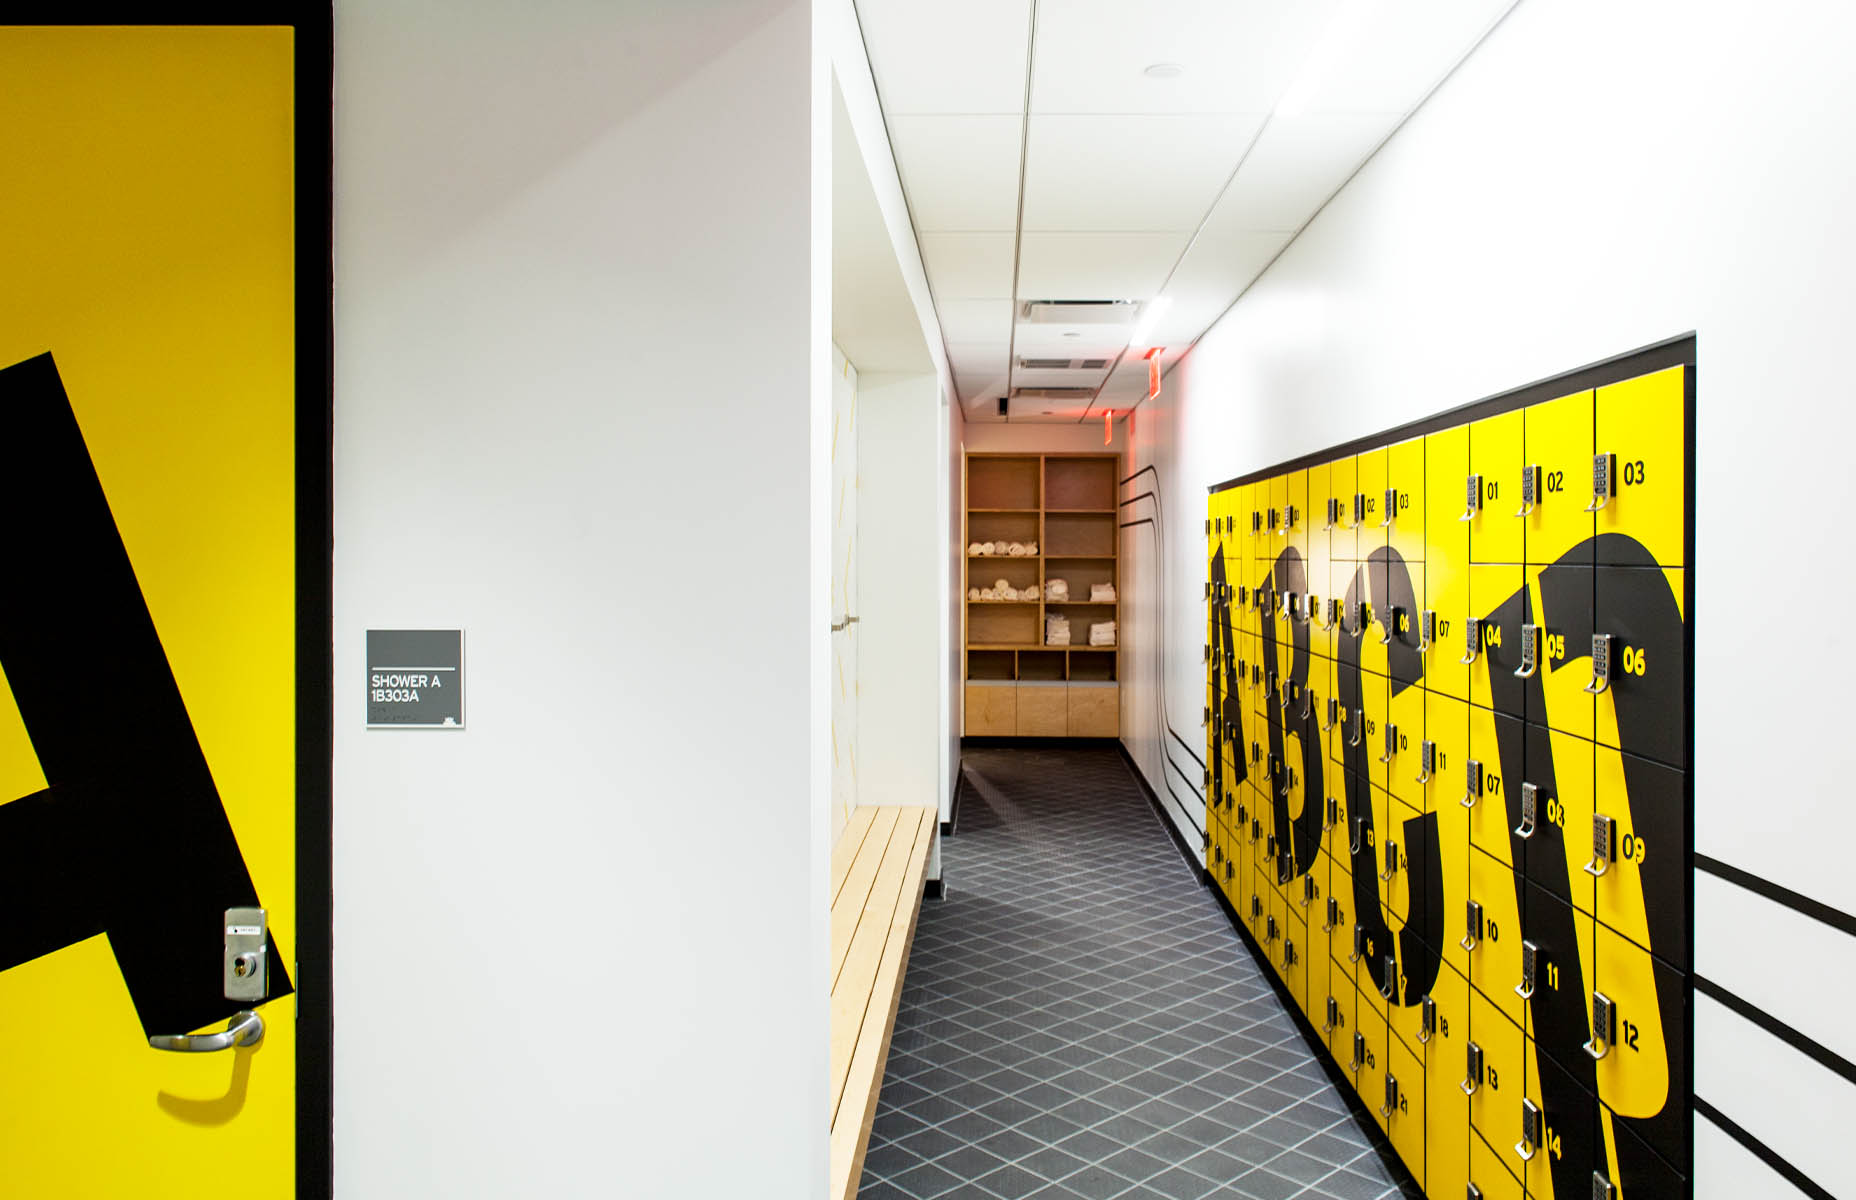 Environmental graphics for New York on Two Wheels. Typographic treatment on lockers.